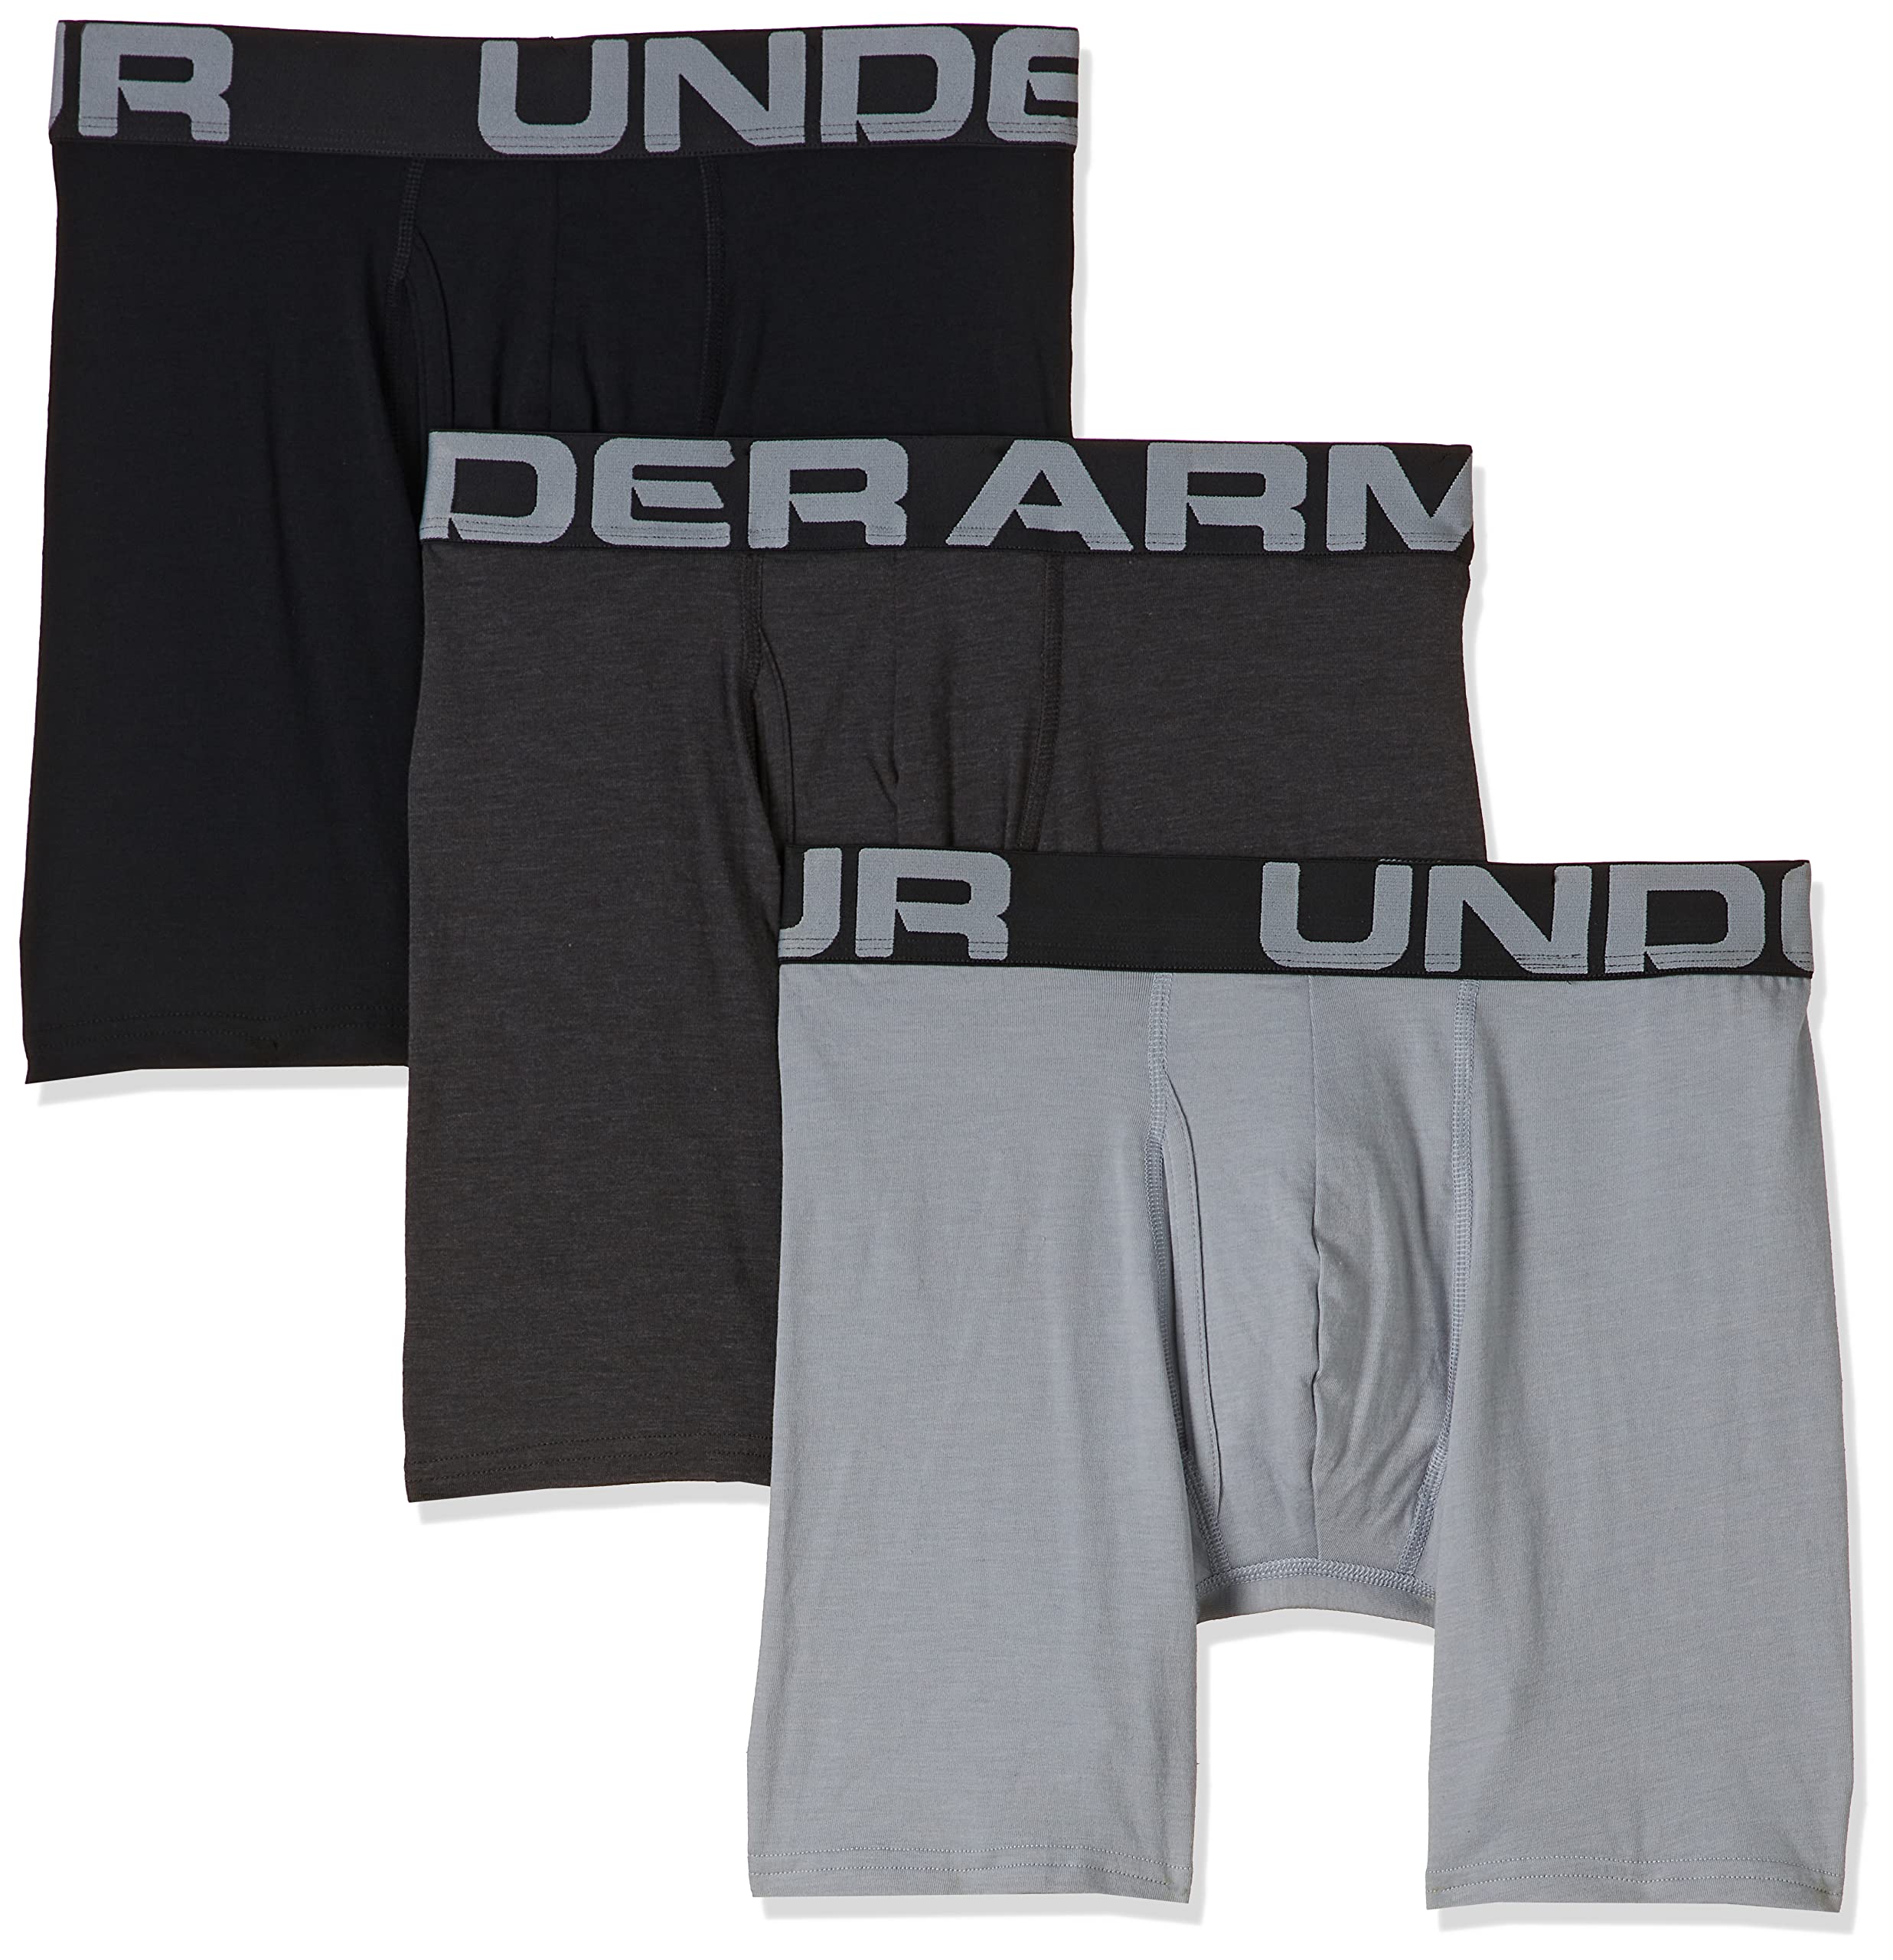 Under Armour Charged cotton 6in boxers in grey 3 Pack